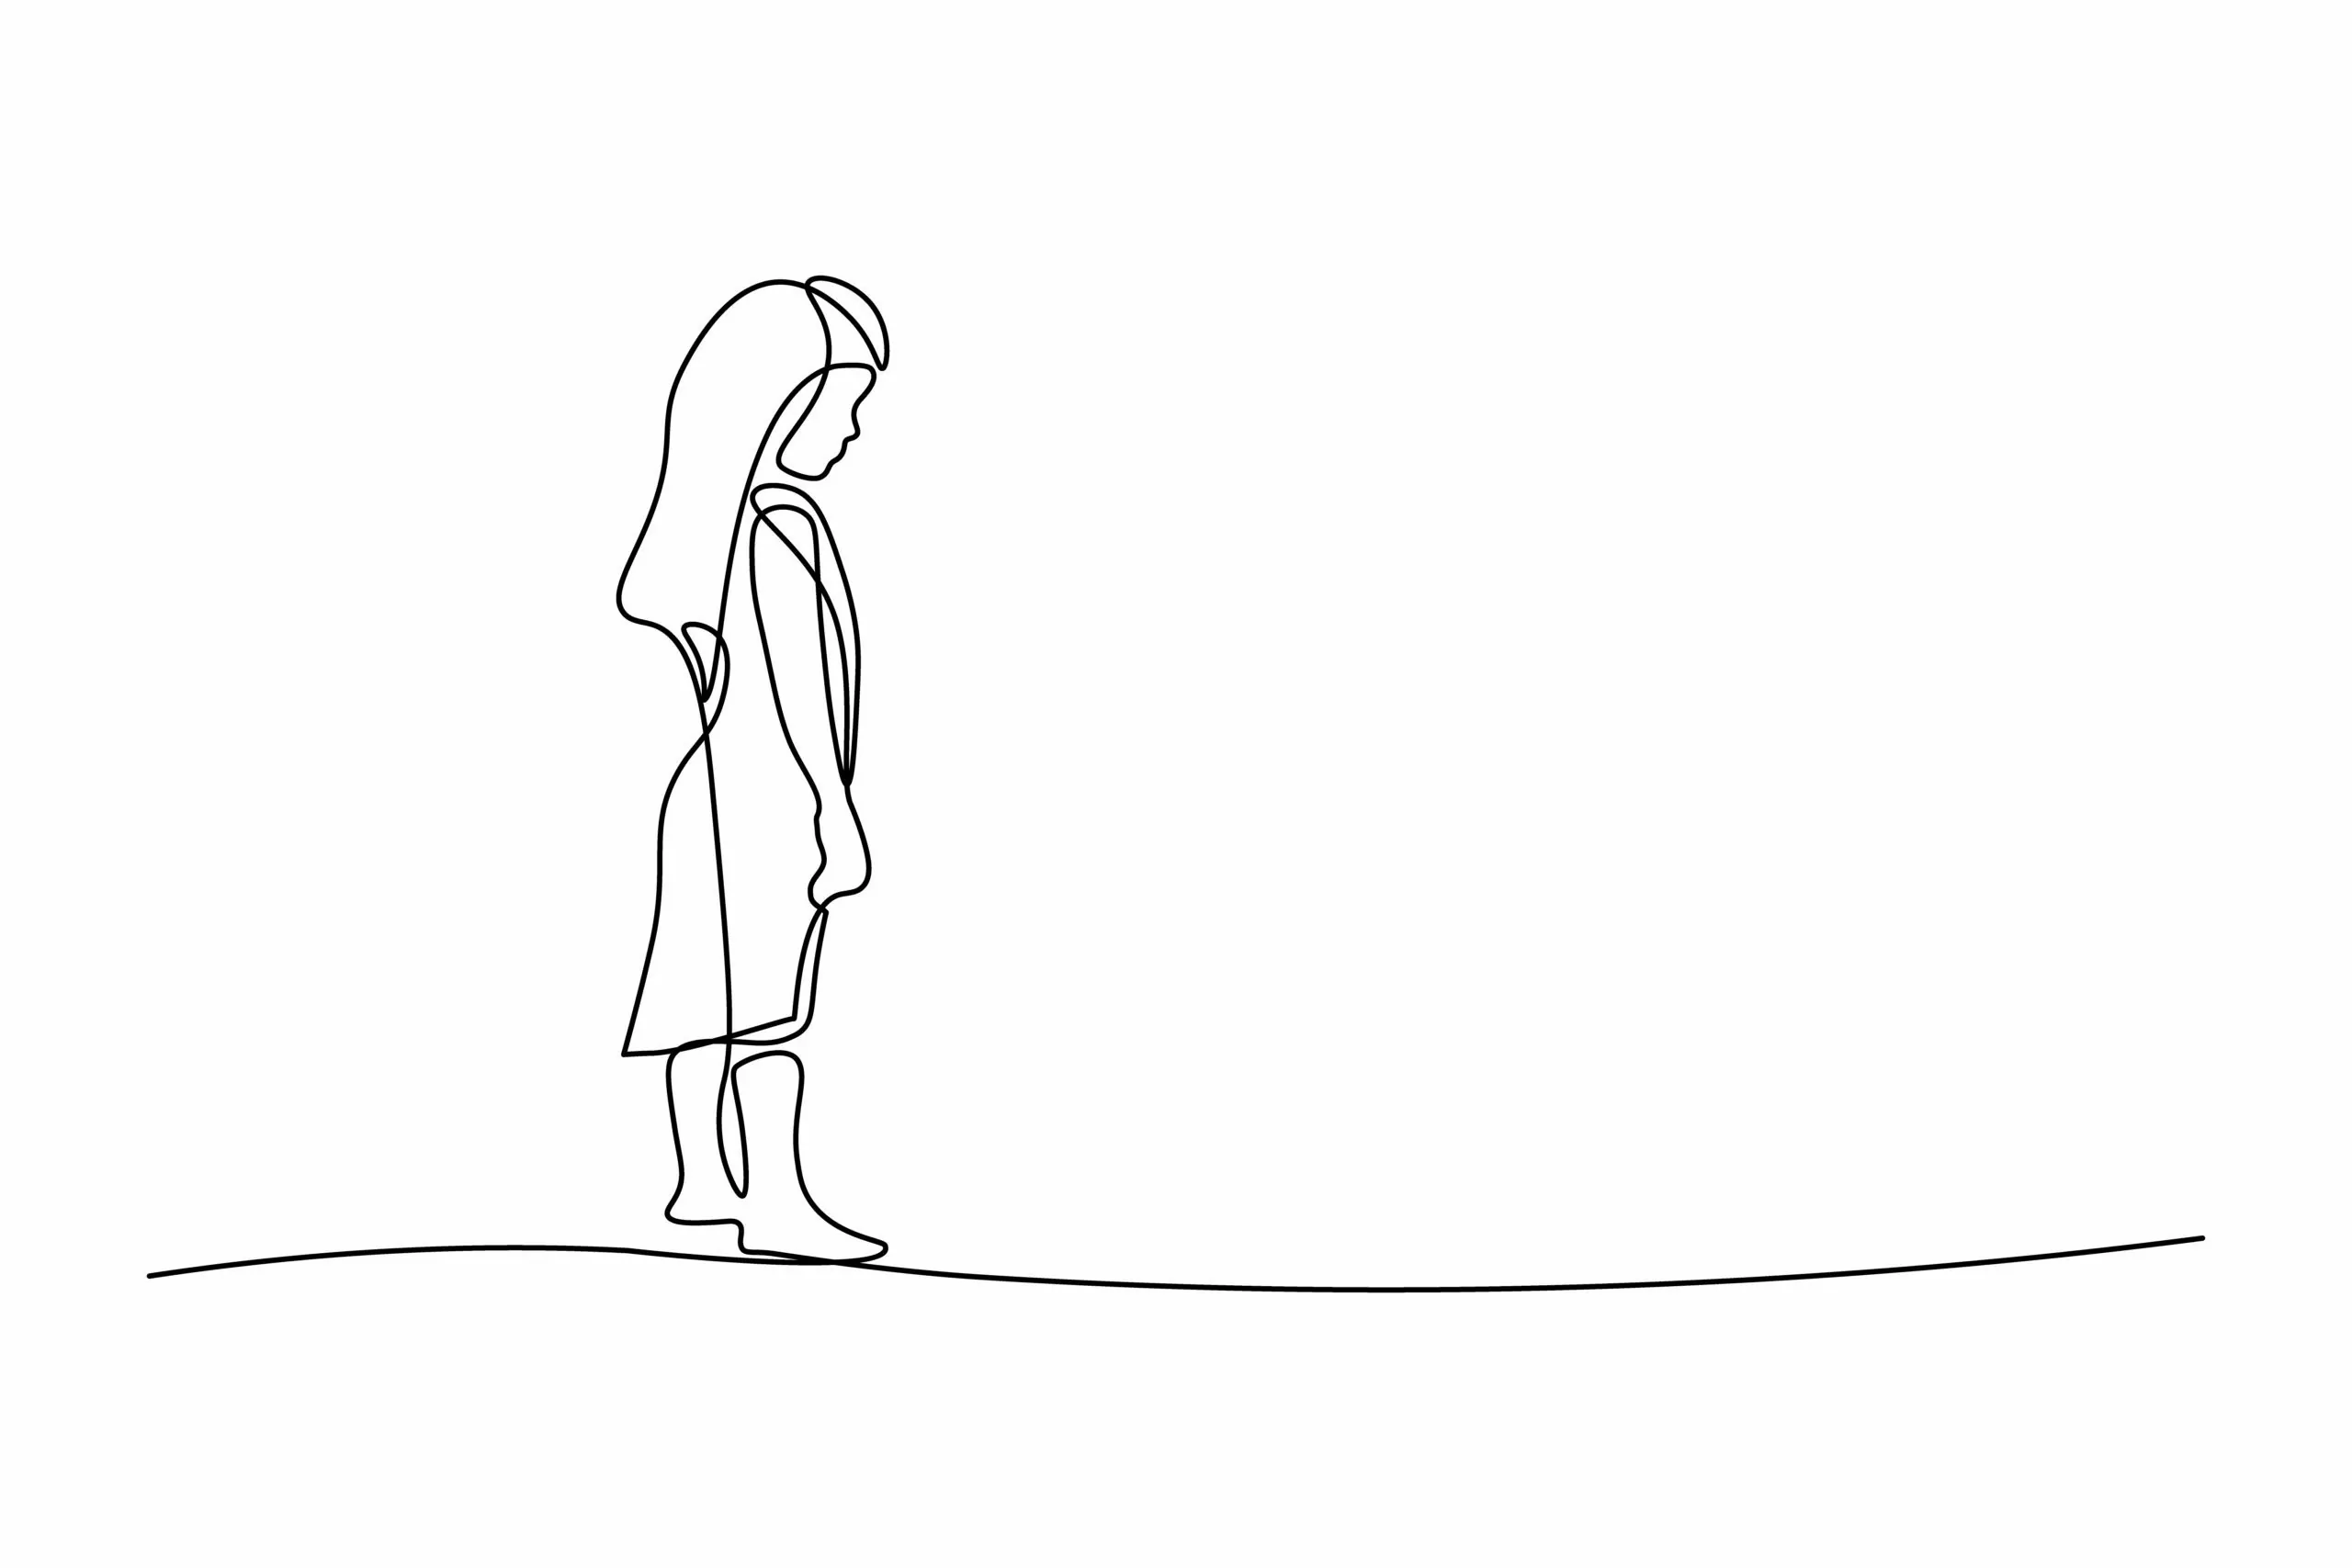 Sad little girl in continuous line art drawing style. Upset kid looking lonely black linear sketch isolated on white background. Vector illustration